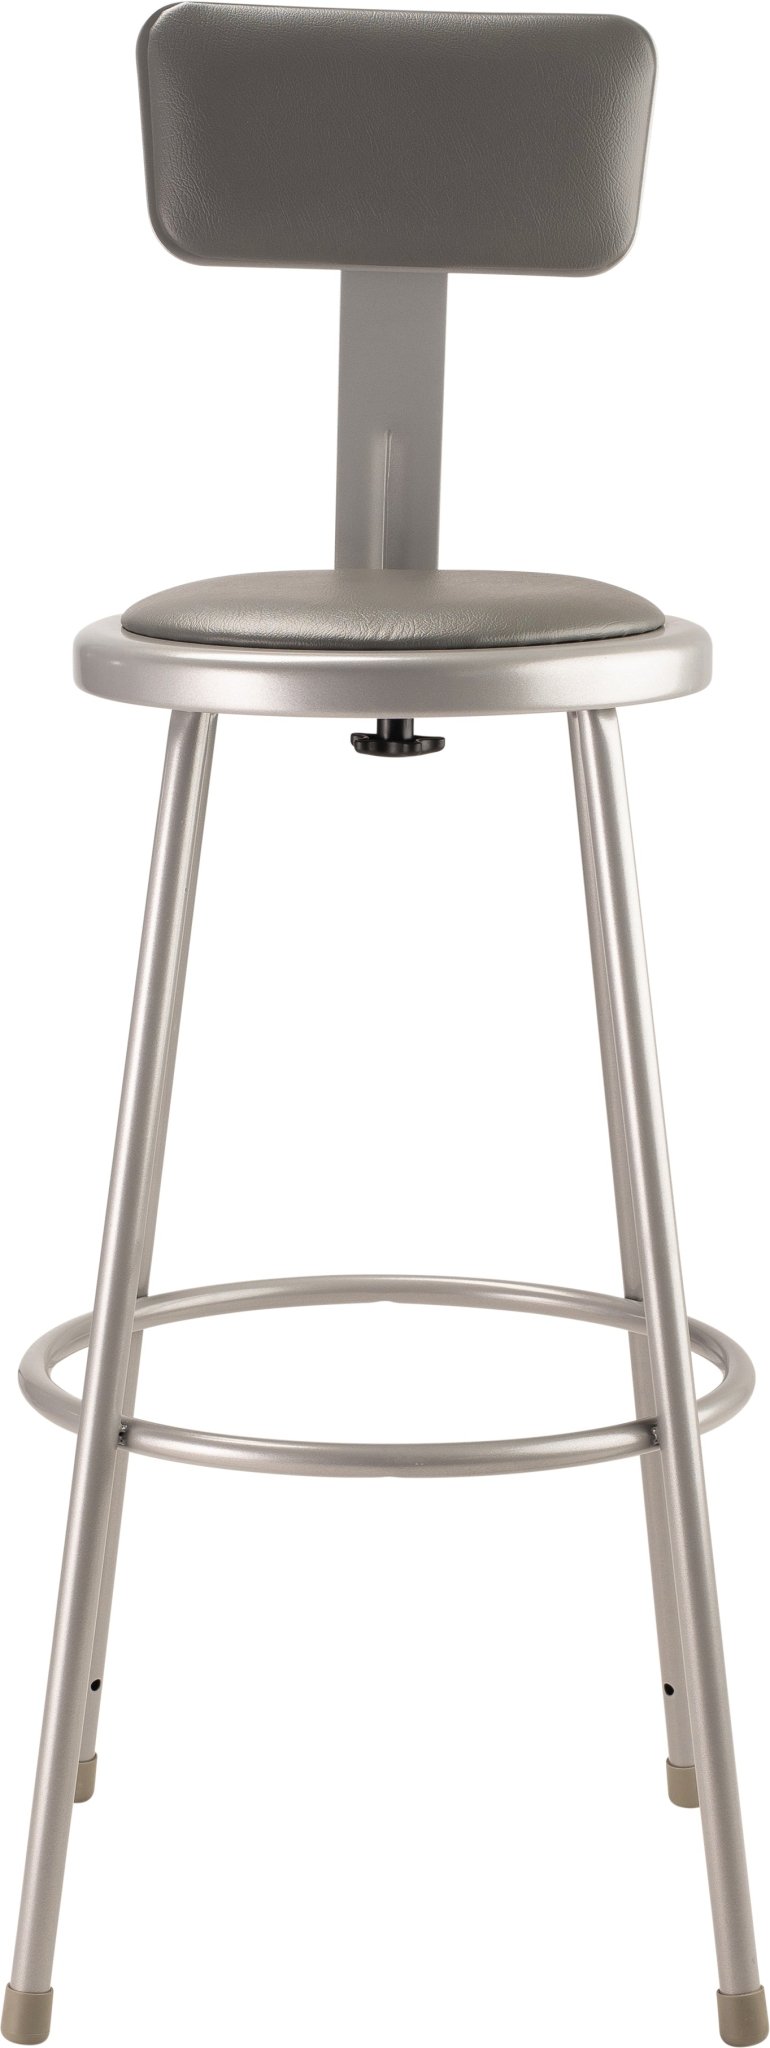 NPS 30" H Stool with Padded Seat and Backrest (National Public Seating NPS-6430B) - SchoolOutlet